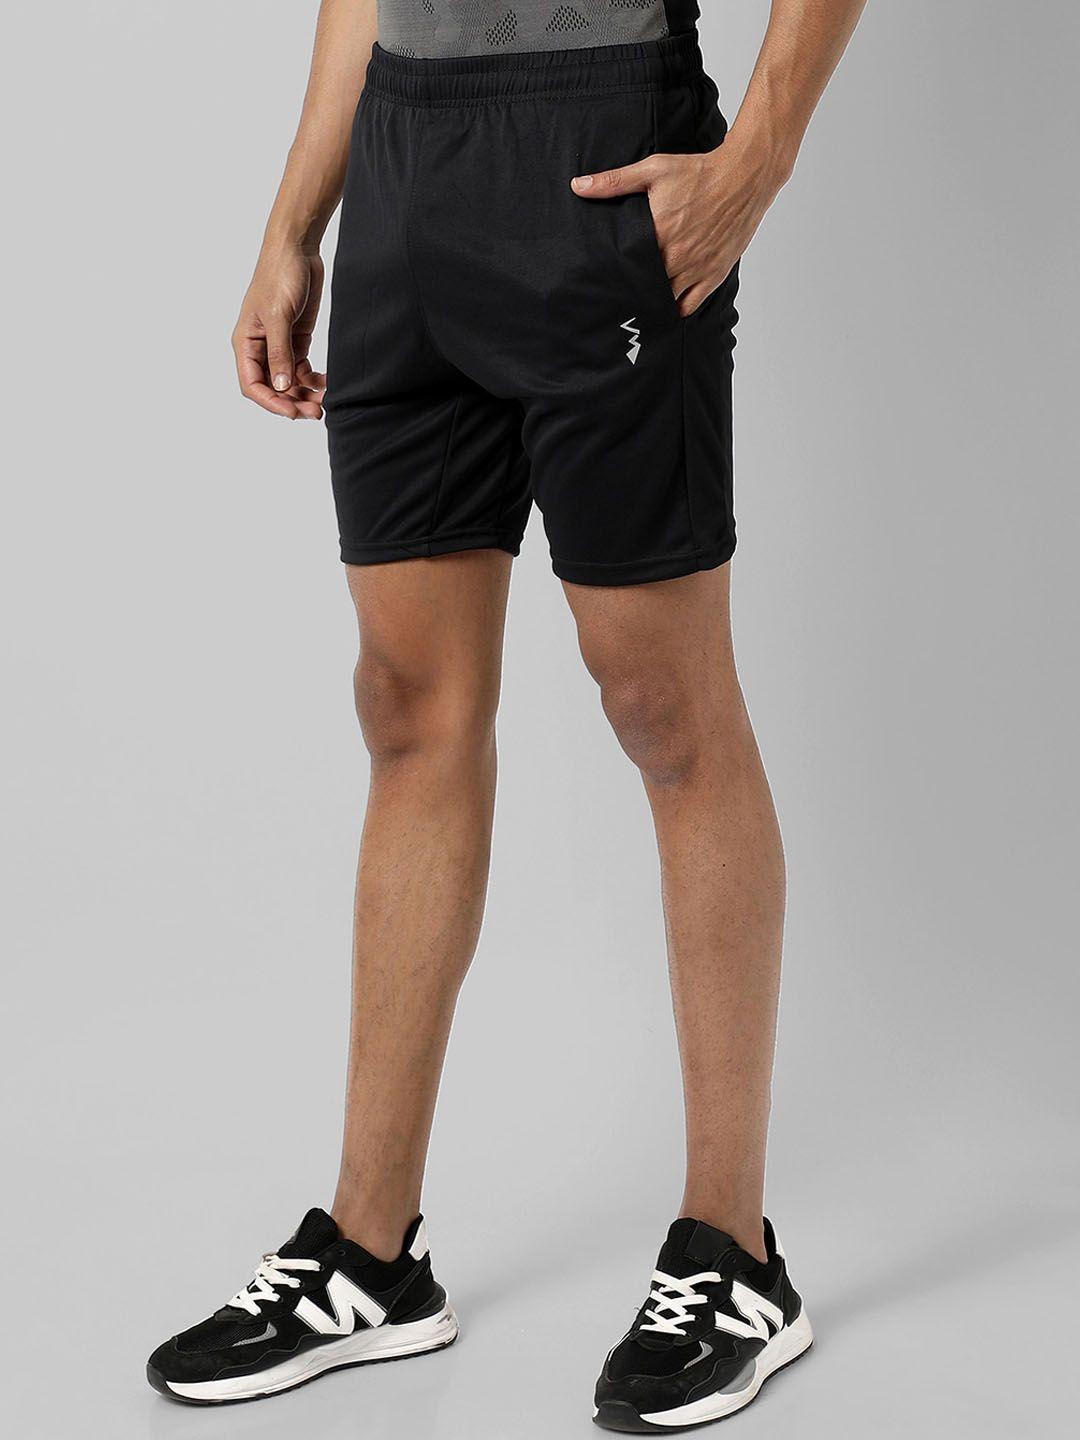 campus-sutra-men-mid-rise-outdoor-sports-shorts